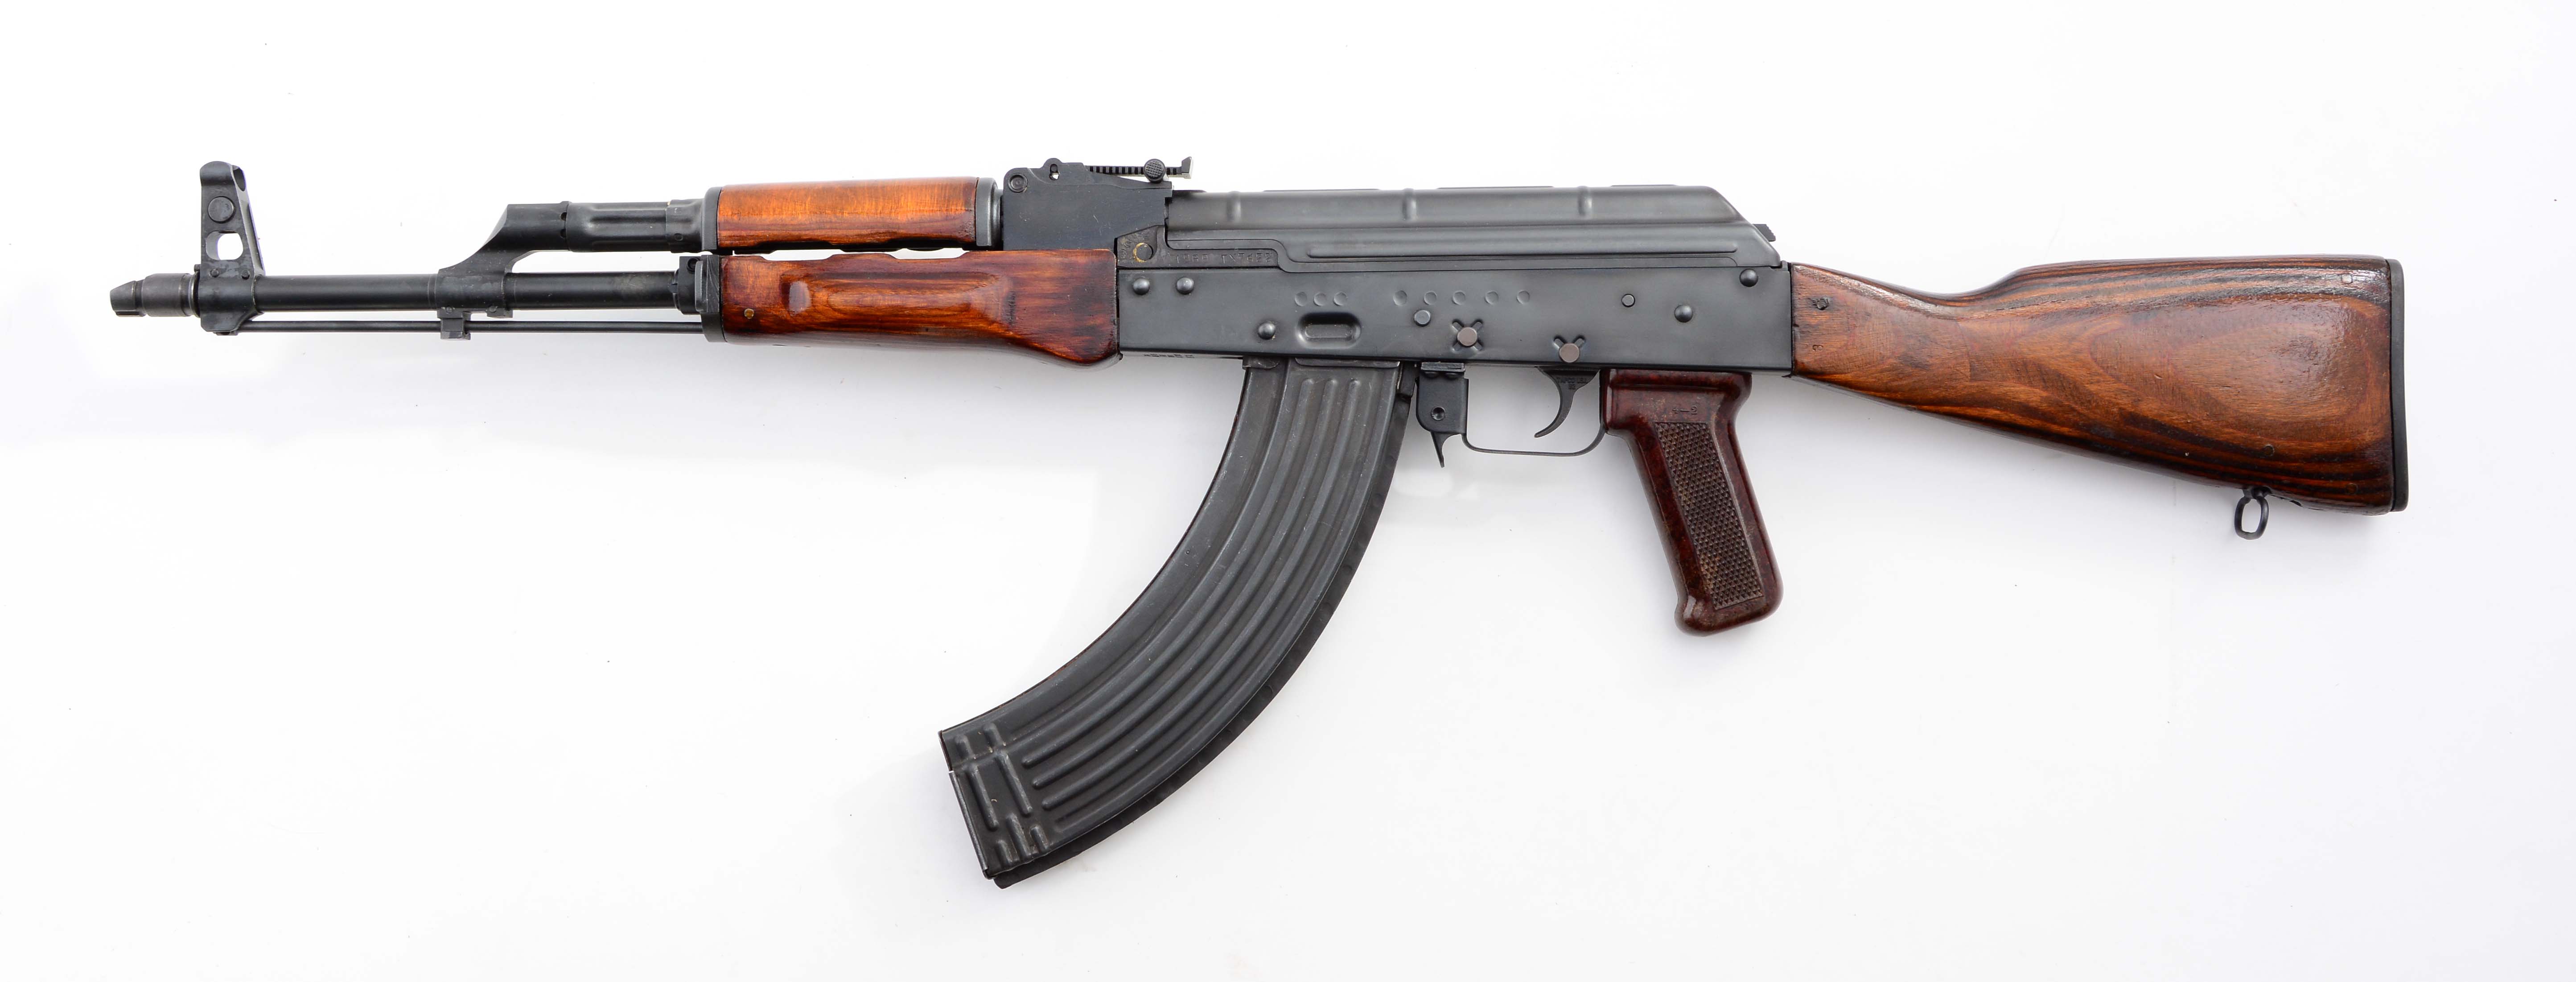 why-america-s-elite-commandoes-turned-to-the-ak-47-in-vietnam-the